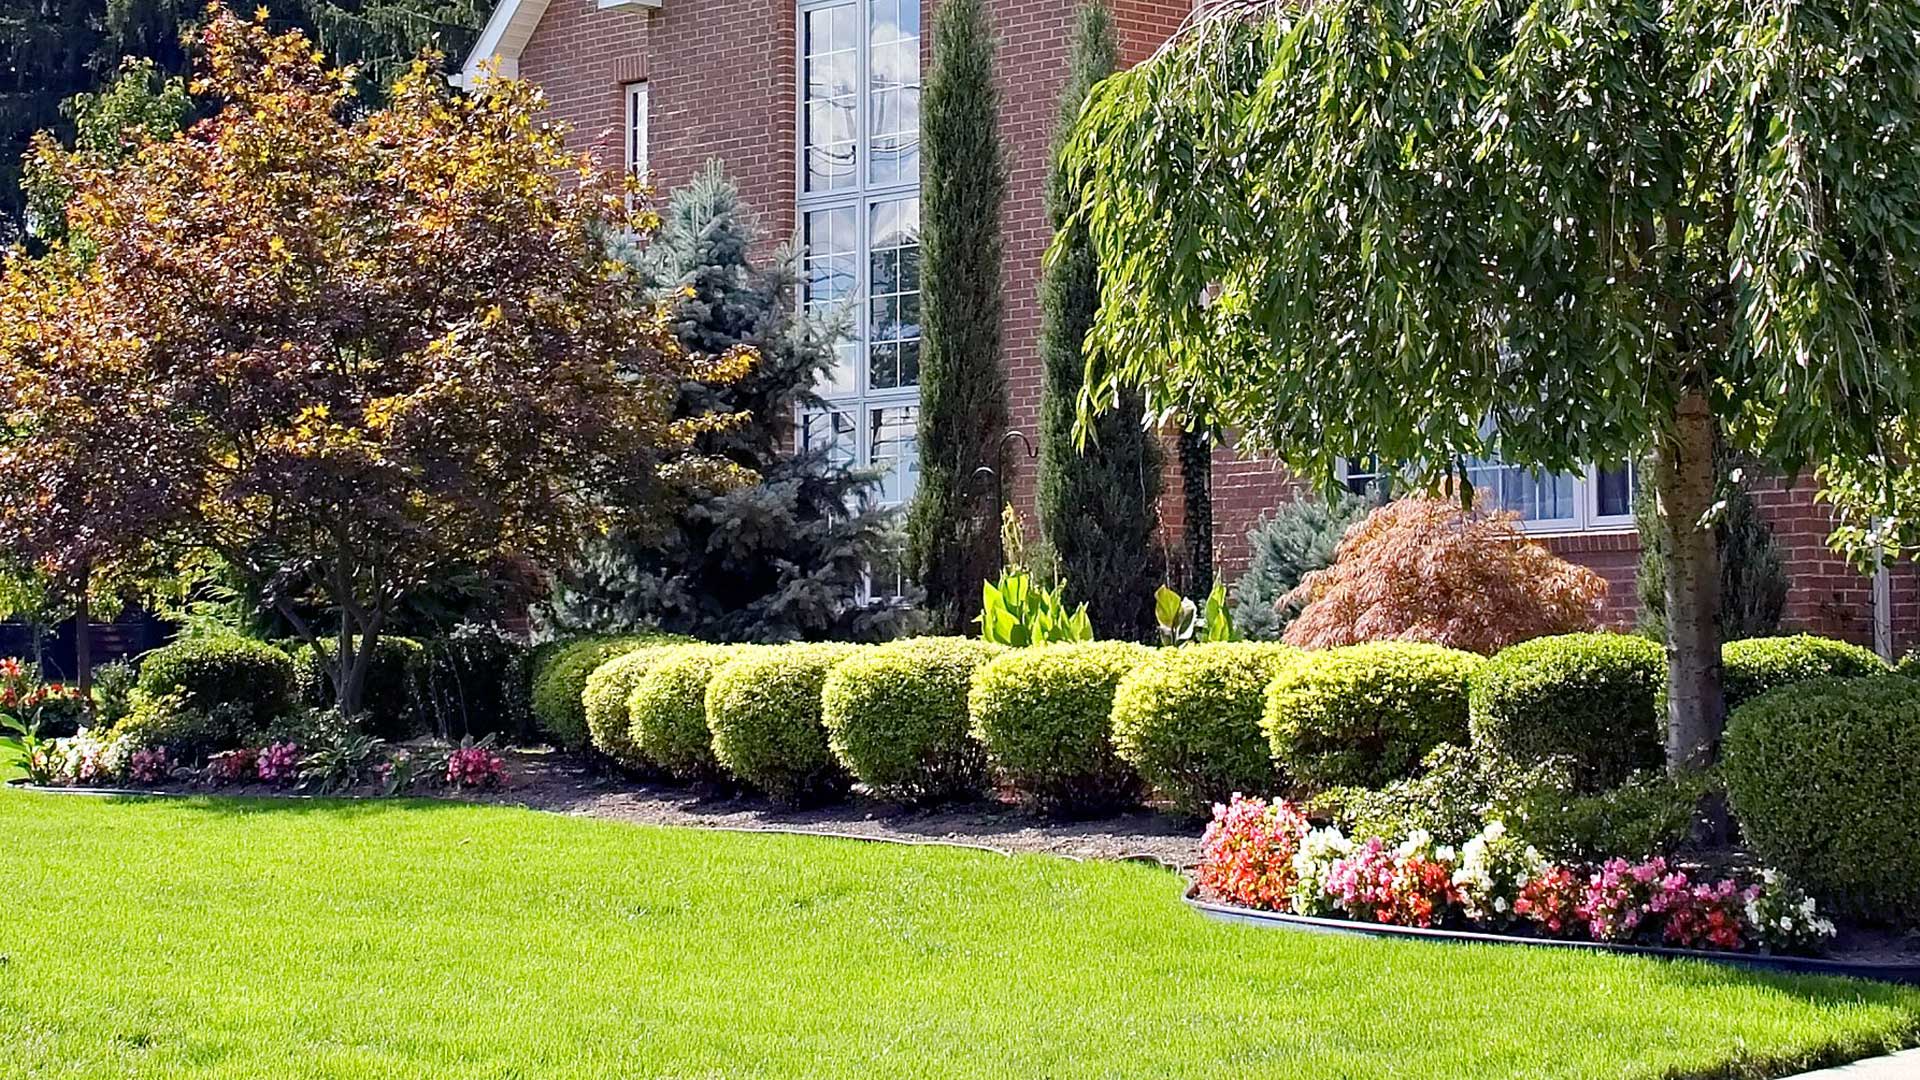 Landscaping with healthy plants that are properly cared for in New Providence, NJ.